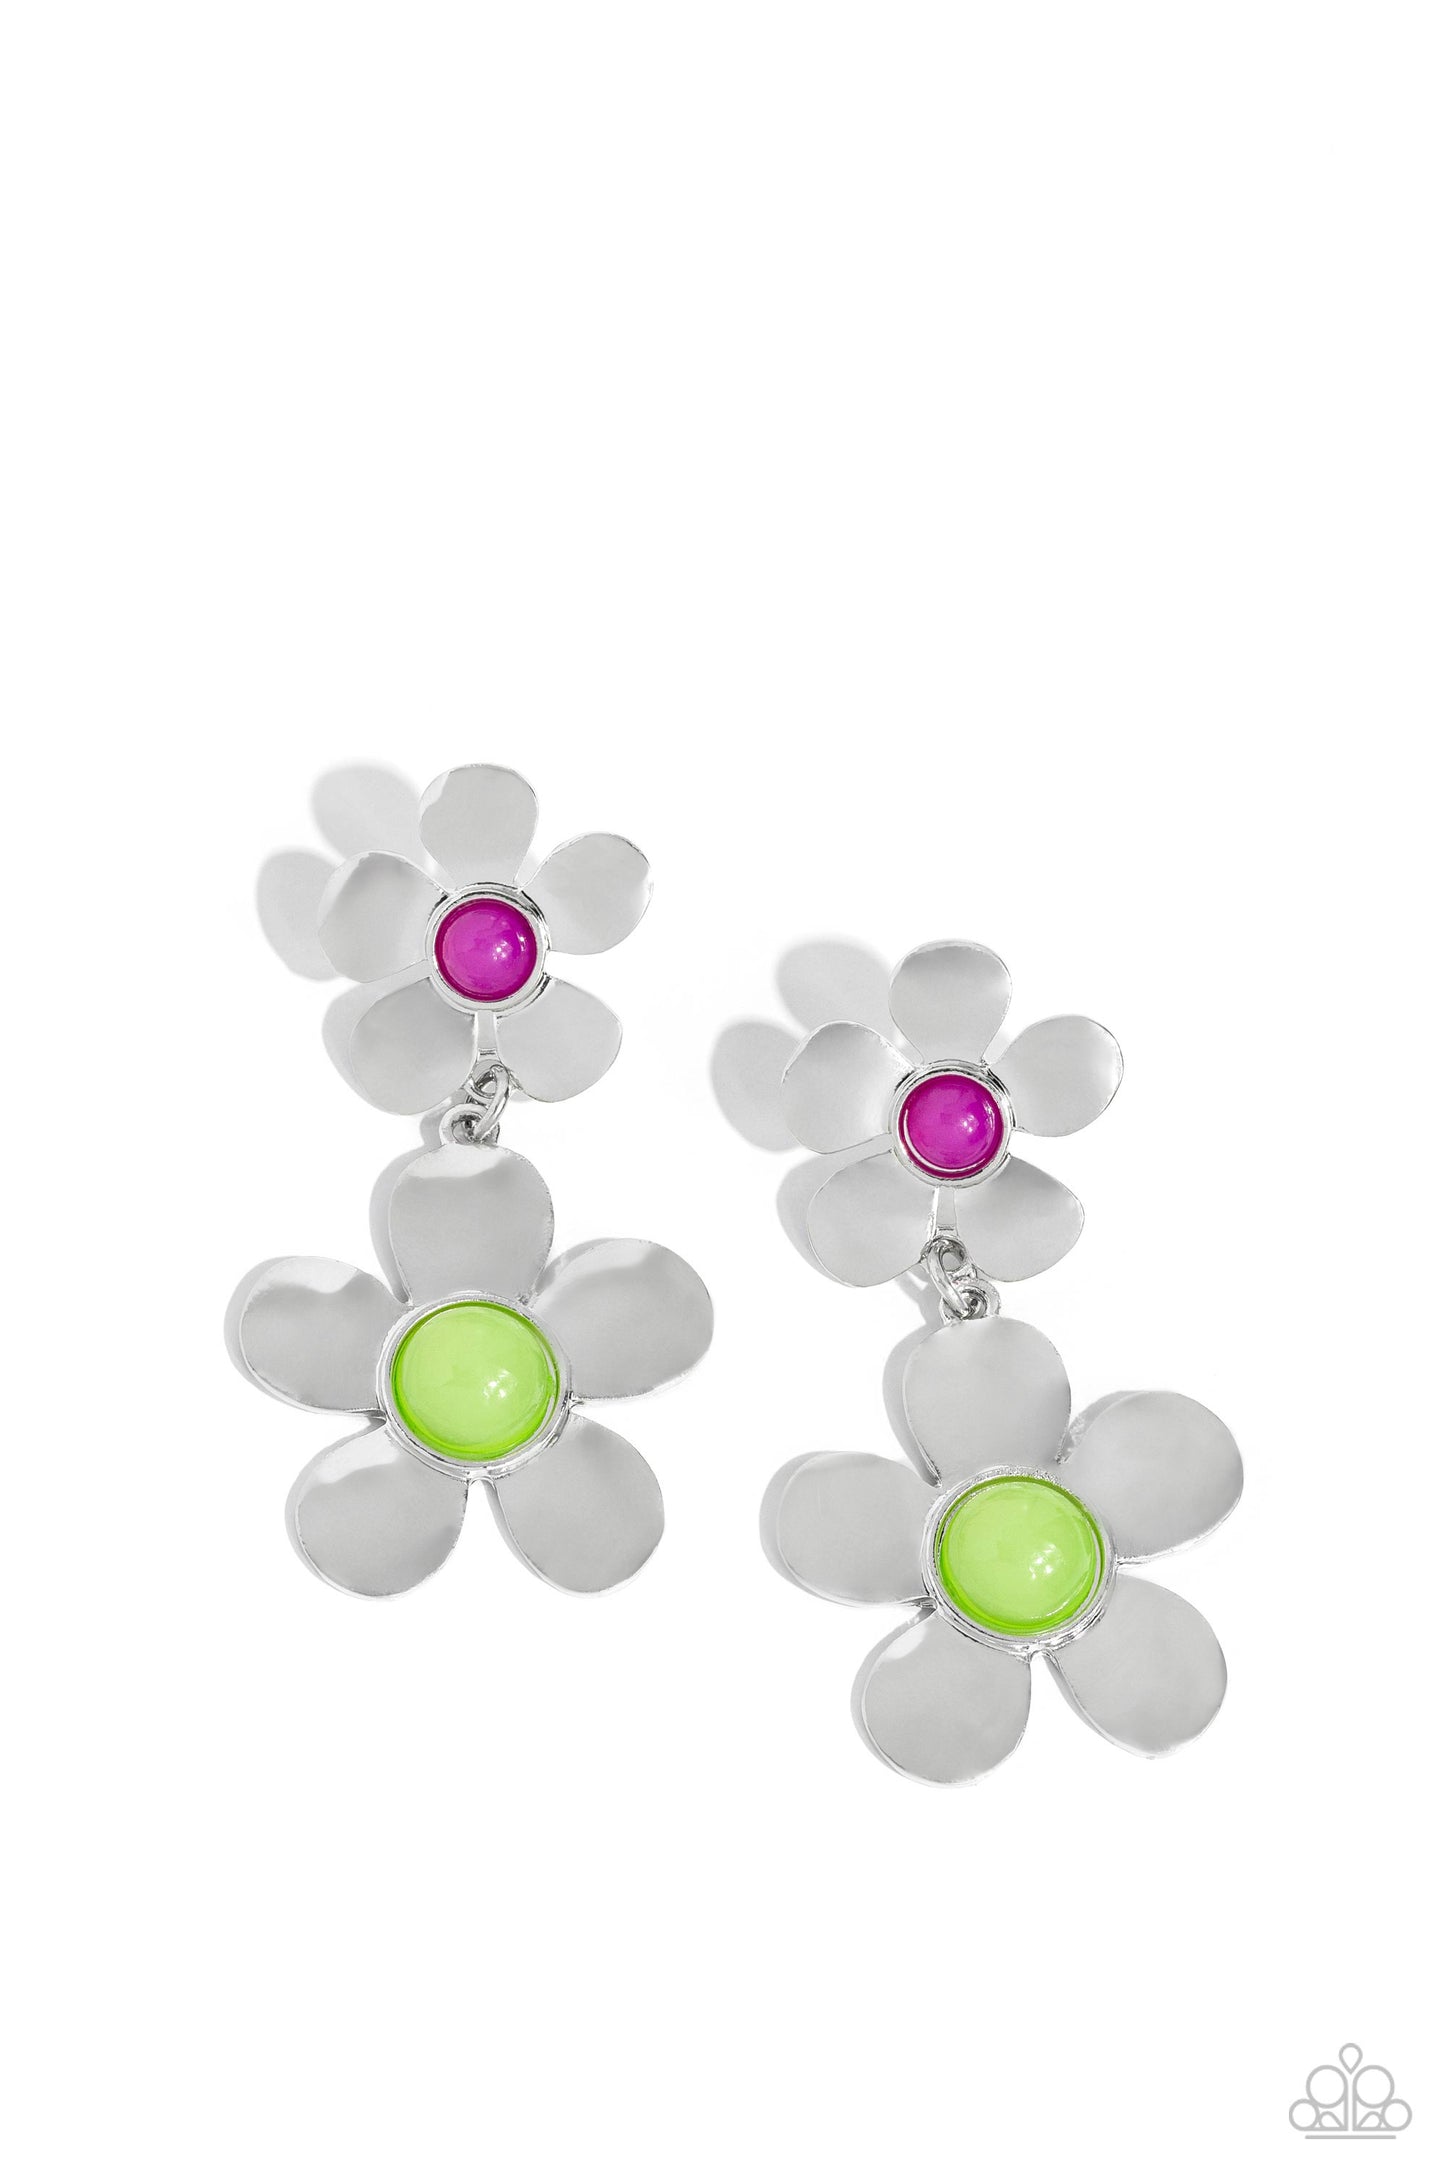 Fashionable Florals - Green Earrings -  Paparazzi Accessories